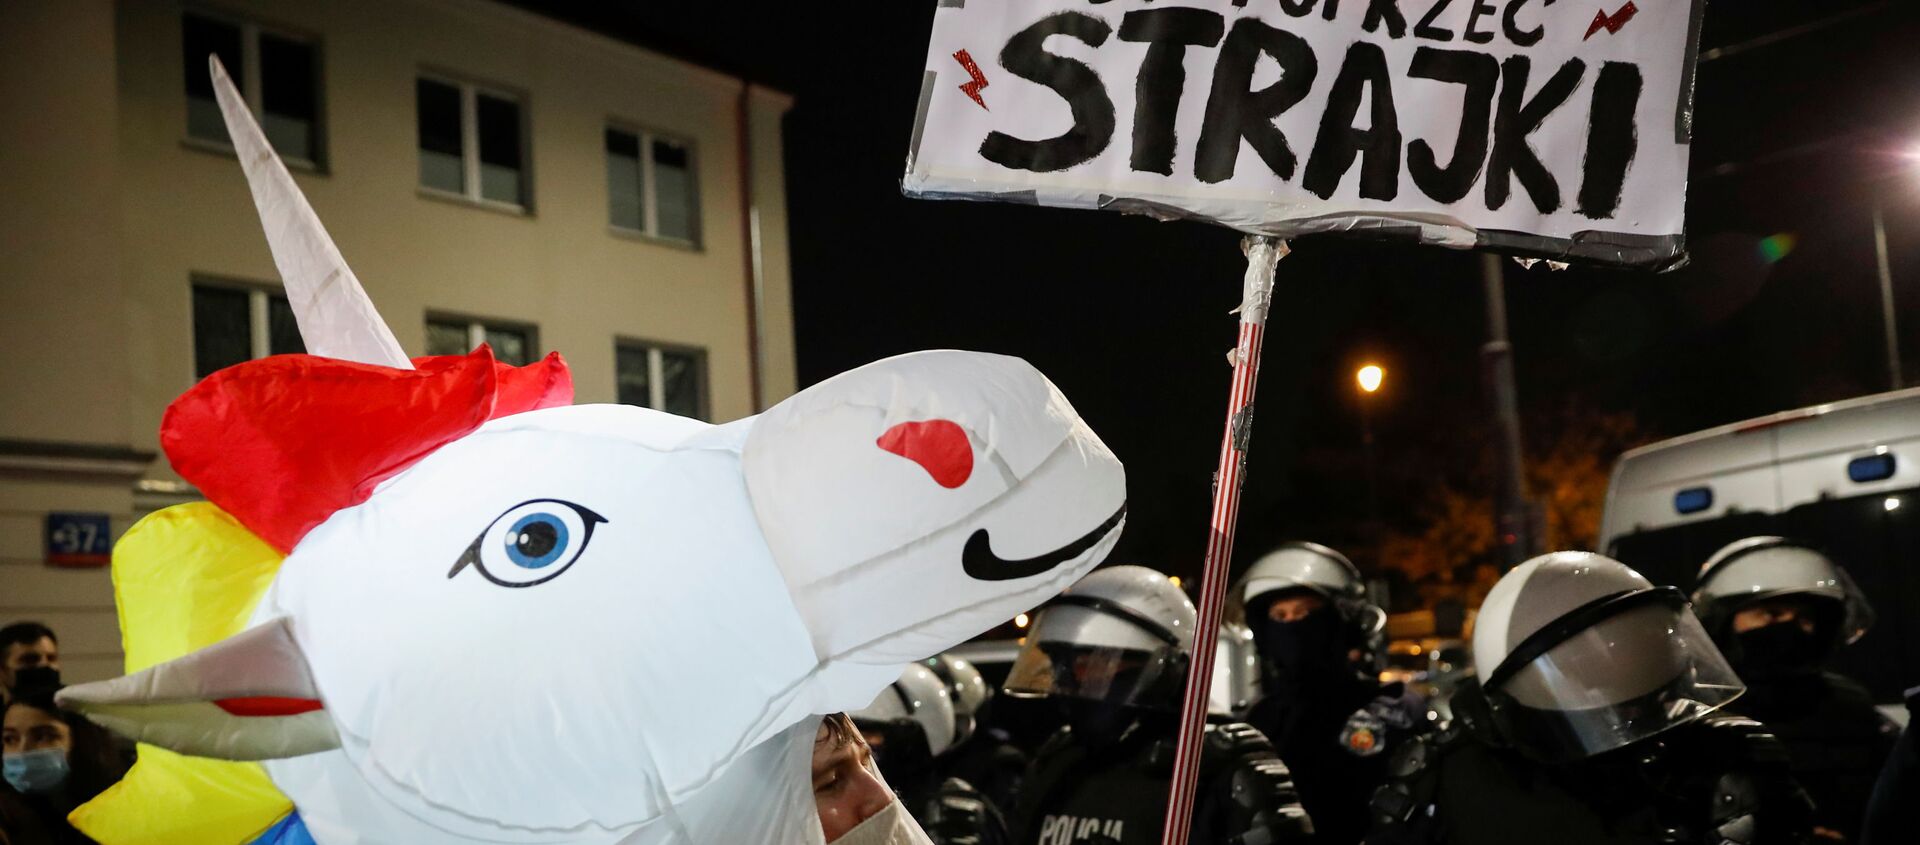 A demonstrator dressed up as a unicorn takes part in a protest against the ruling by Poland's Constitutional Tribunal that imposes a near-total ban on abortion, in Warsaw, Poland, October 30, 2020. - Sputnik International, 1920, 02.11.2020